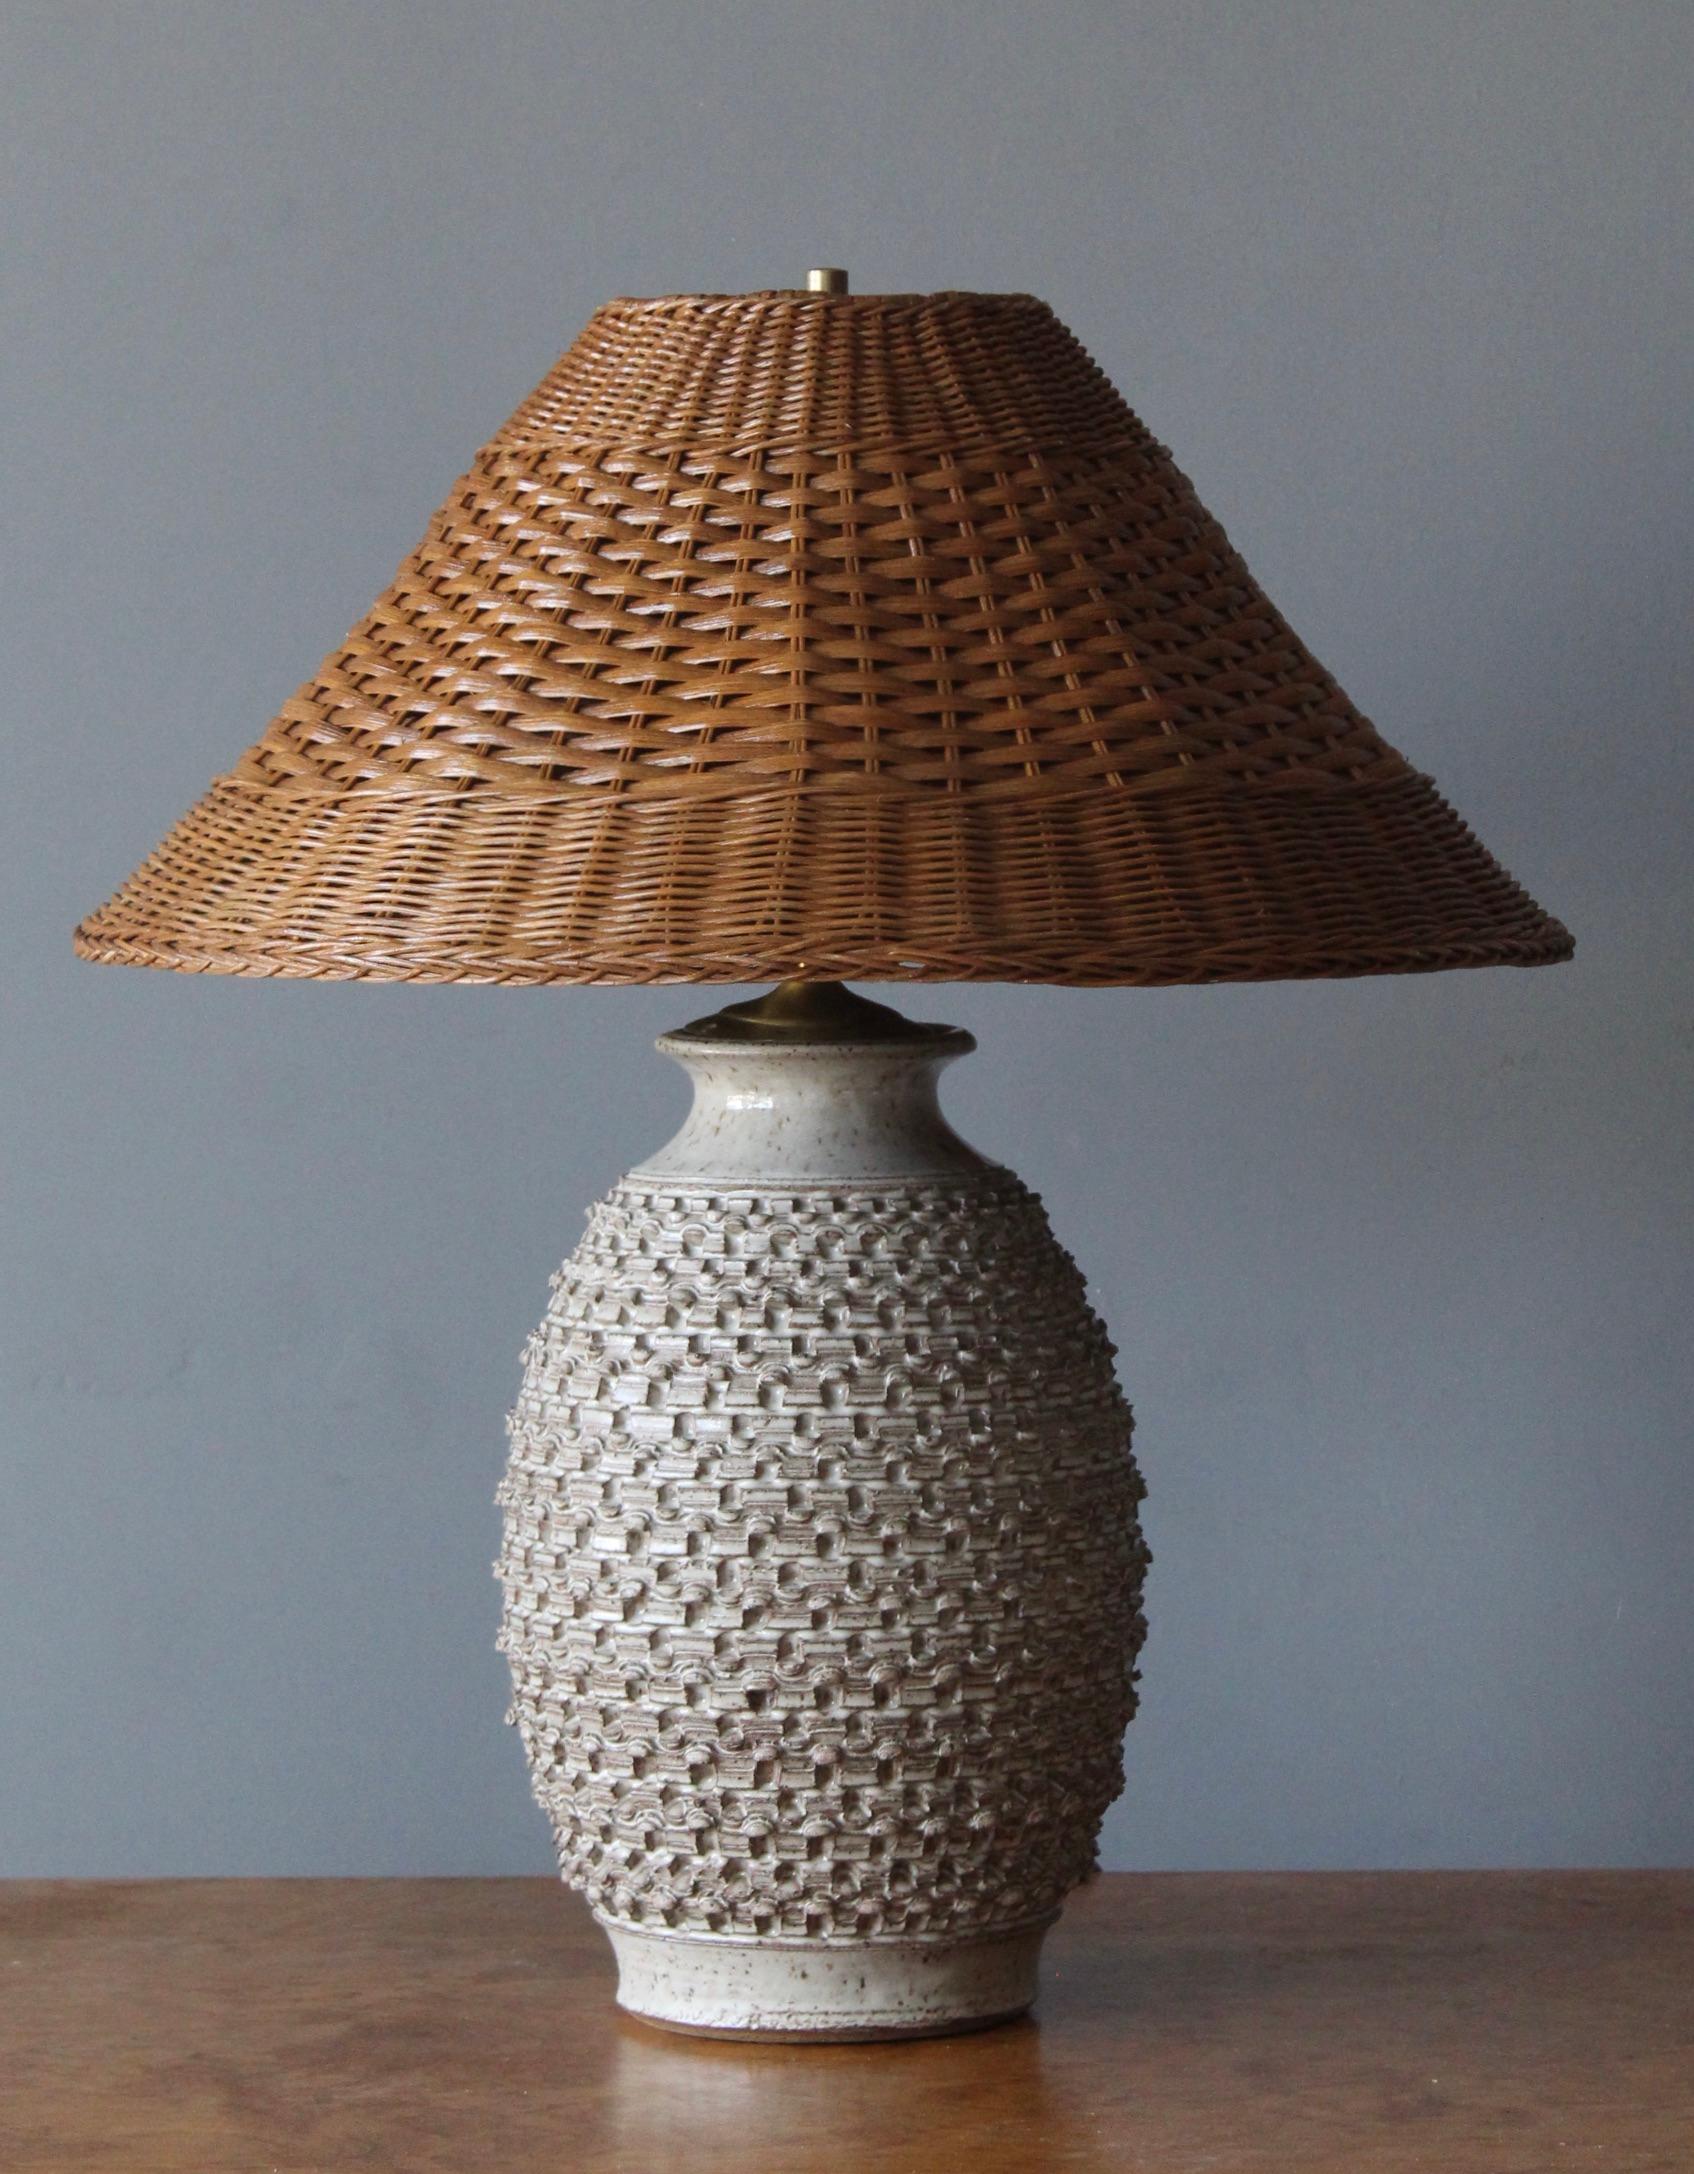 A sizable table lamp in ceramic. Designed by John Coiner and produced Artists Studio, United States, 1977. Form is enhanced by incised artistic details. Signed and dated. Assorted rattan lampshade.

Dimensions include lampshade.